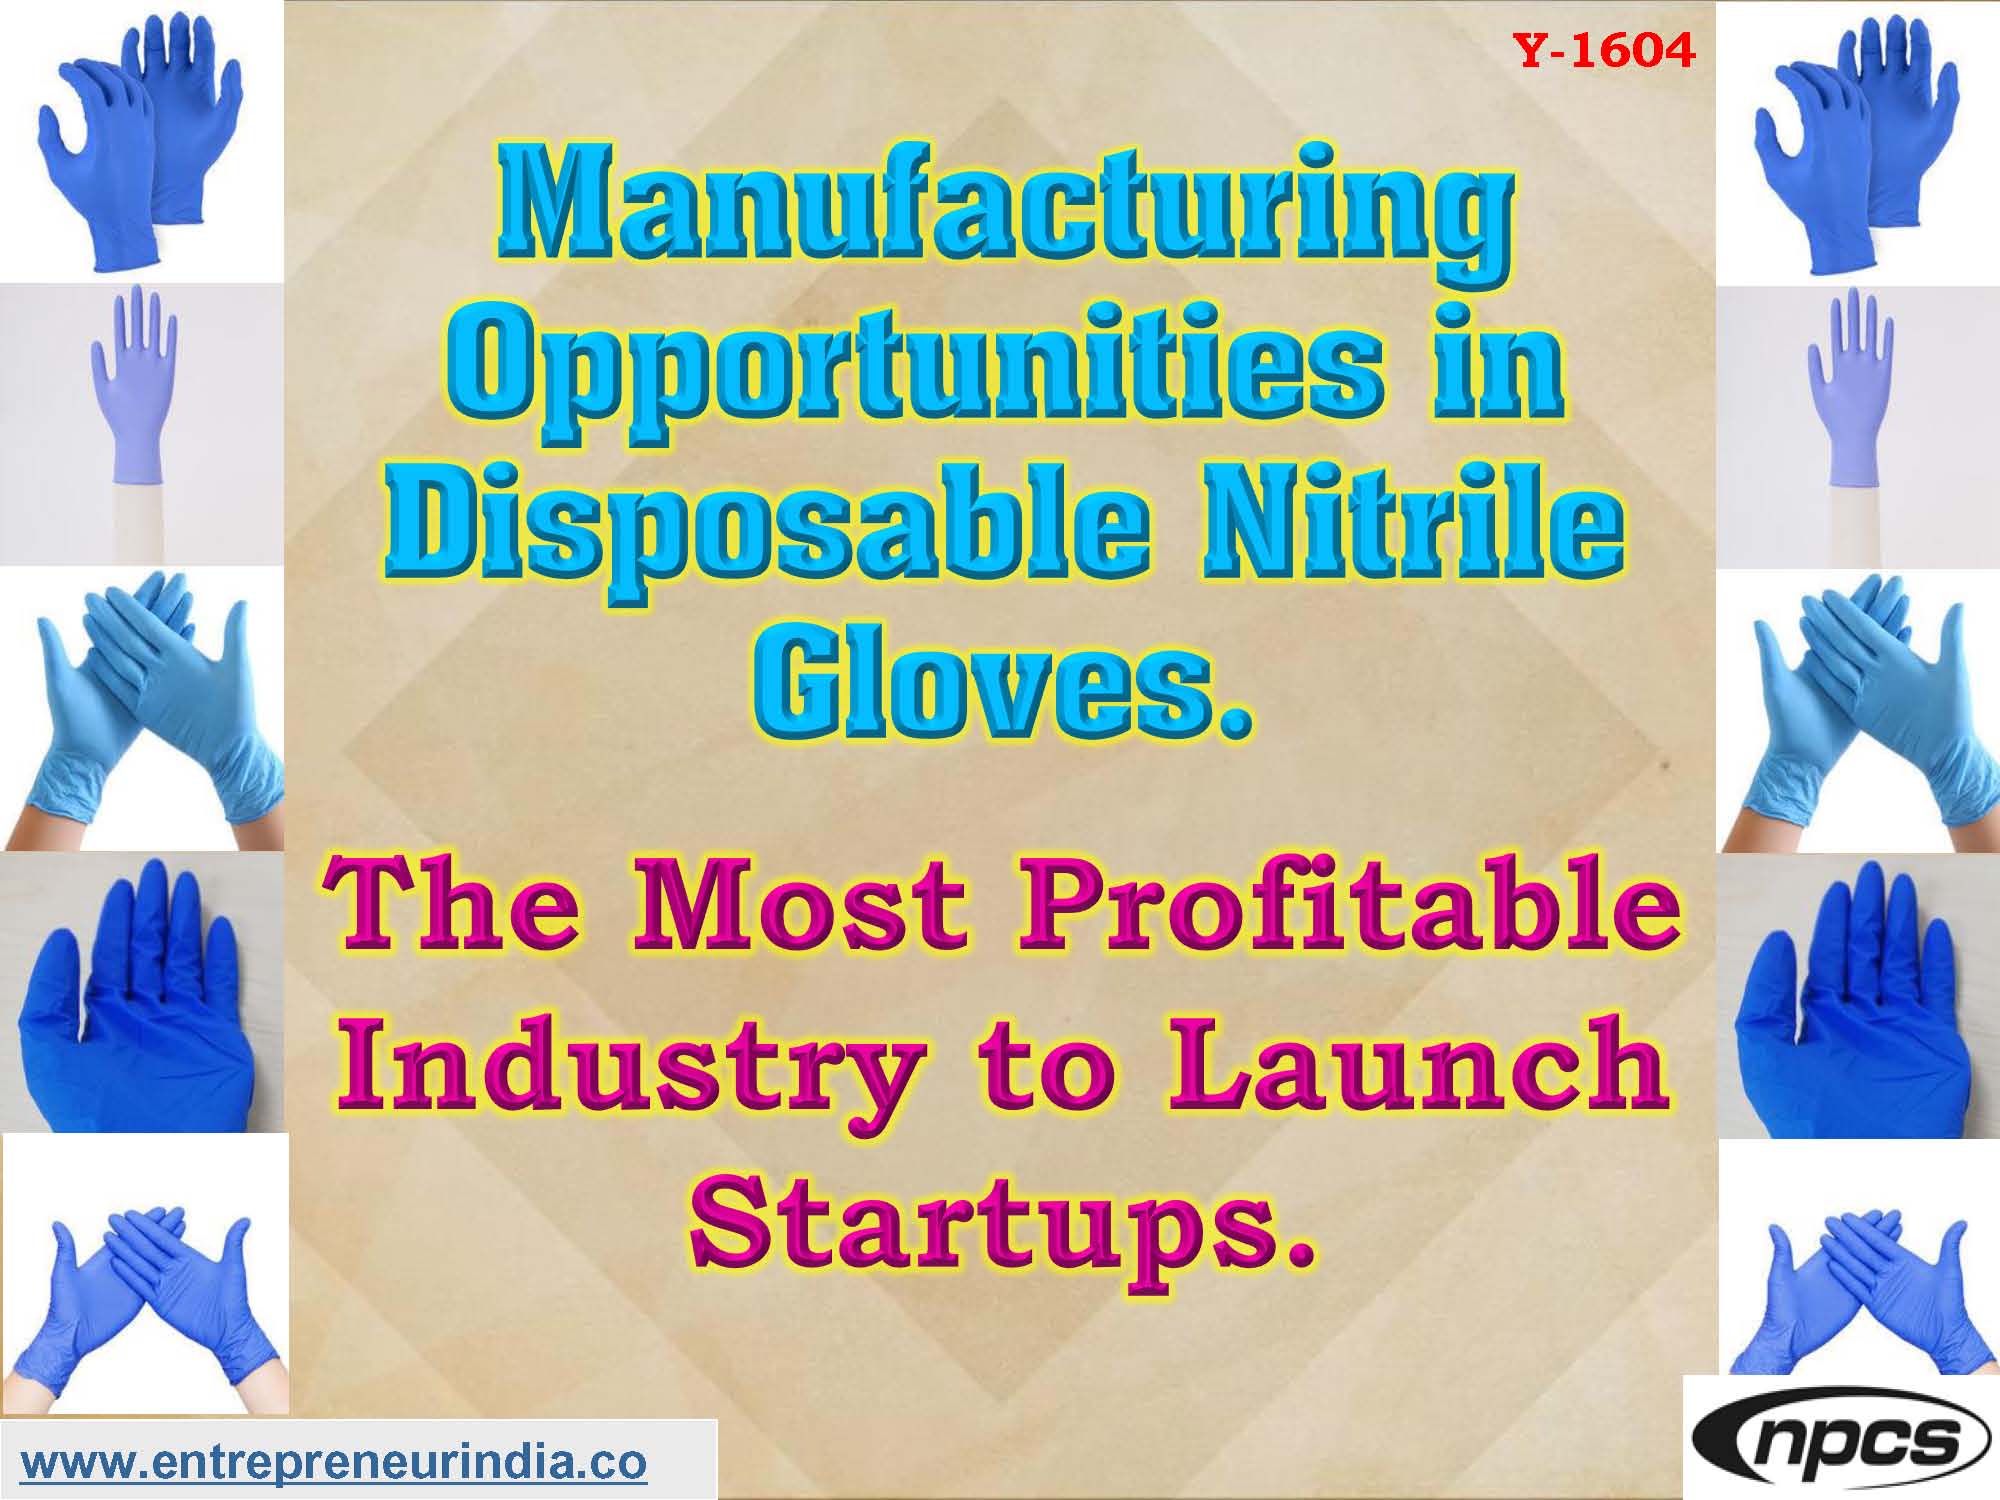 Manufacturing Opportunities in Disposable Nitrile Gloves